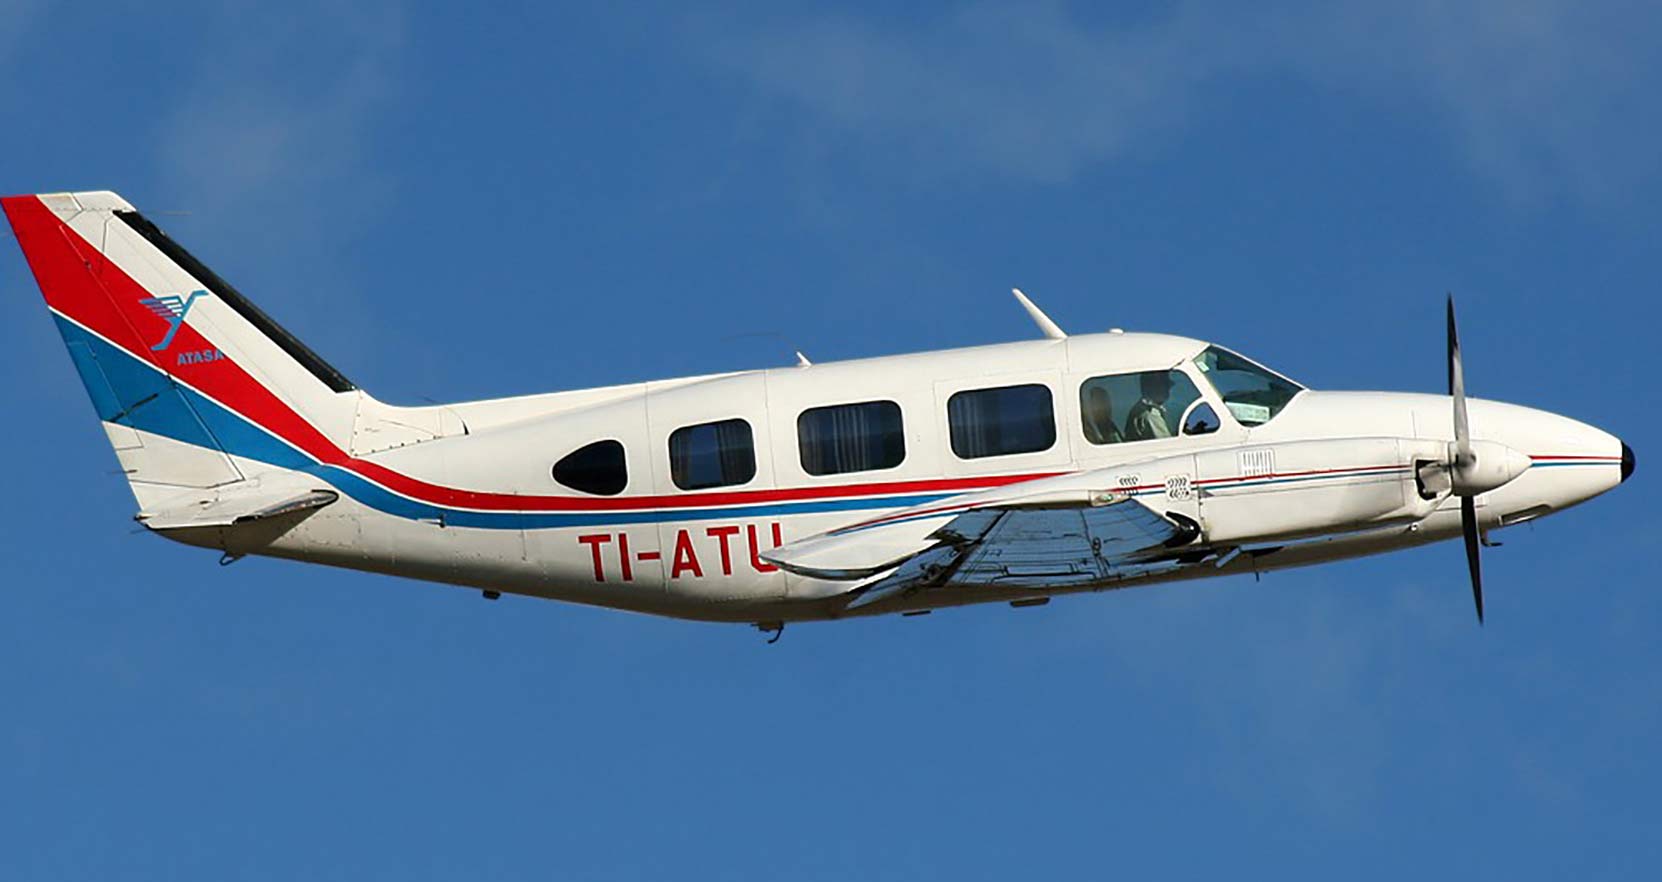 providing flights in Costa Rica and throughout the country